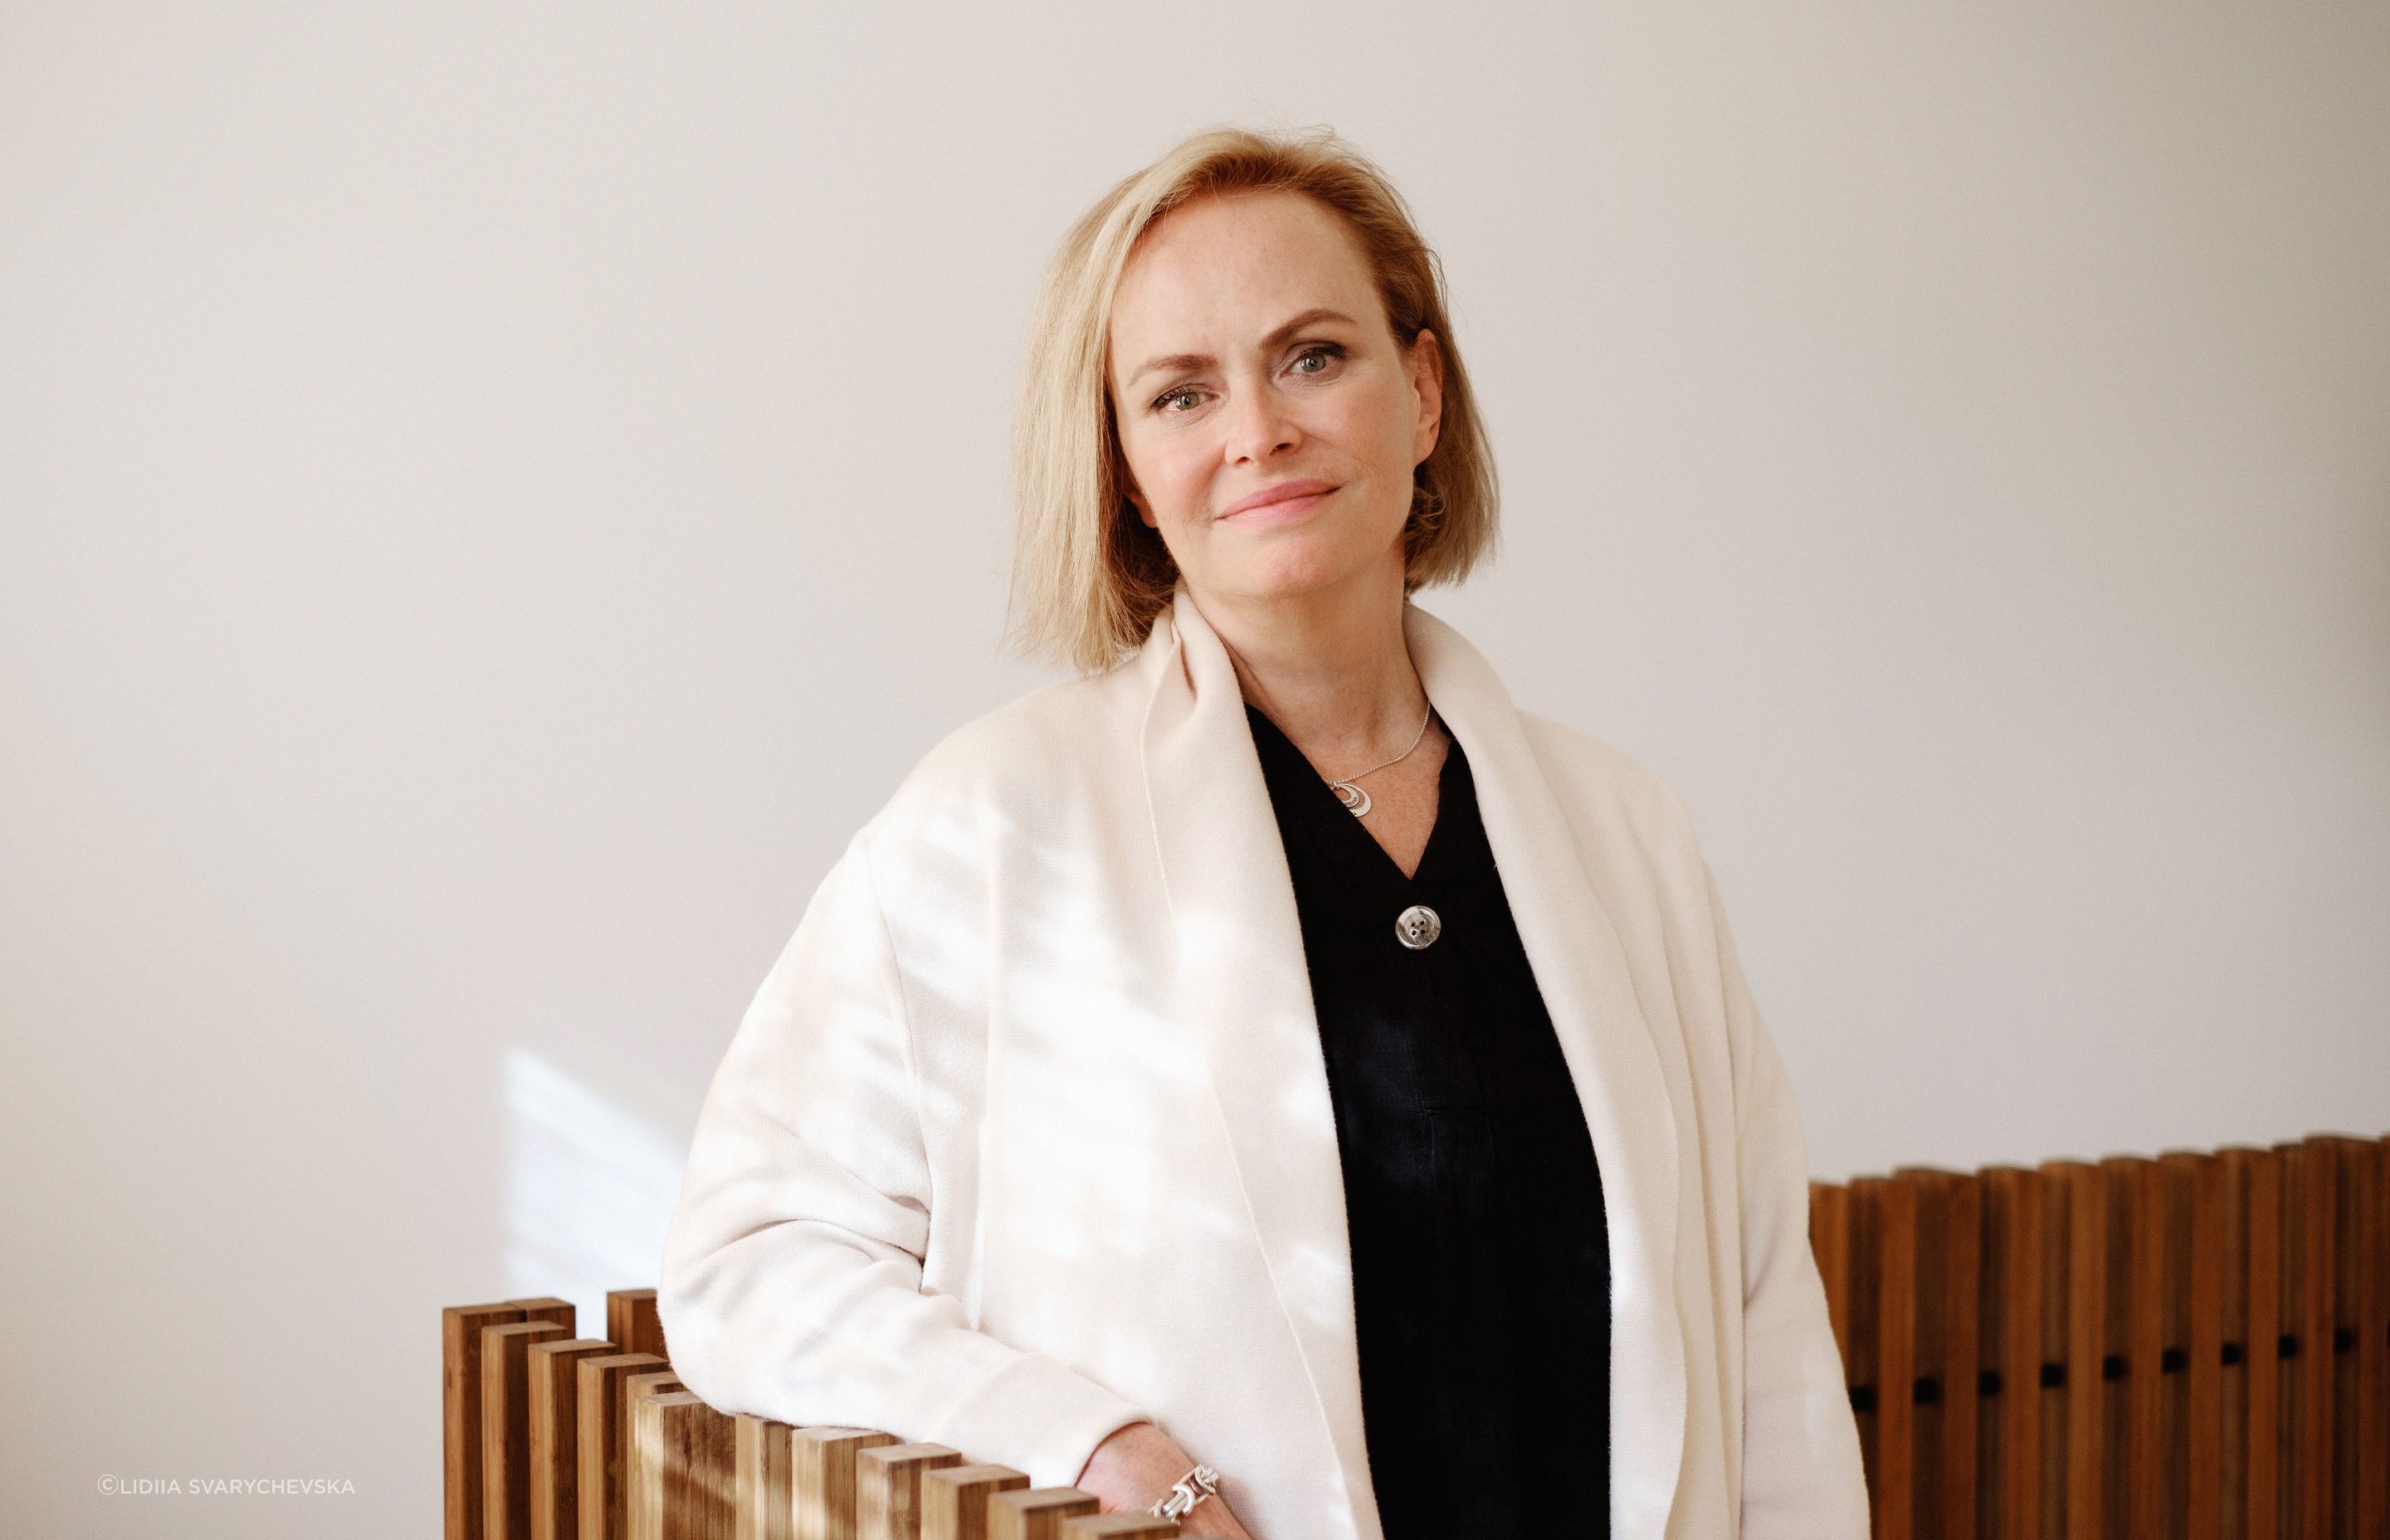 Jennifer Snyders, CEO of House of Bamboo